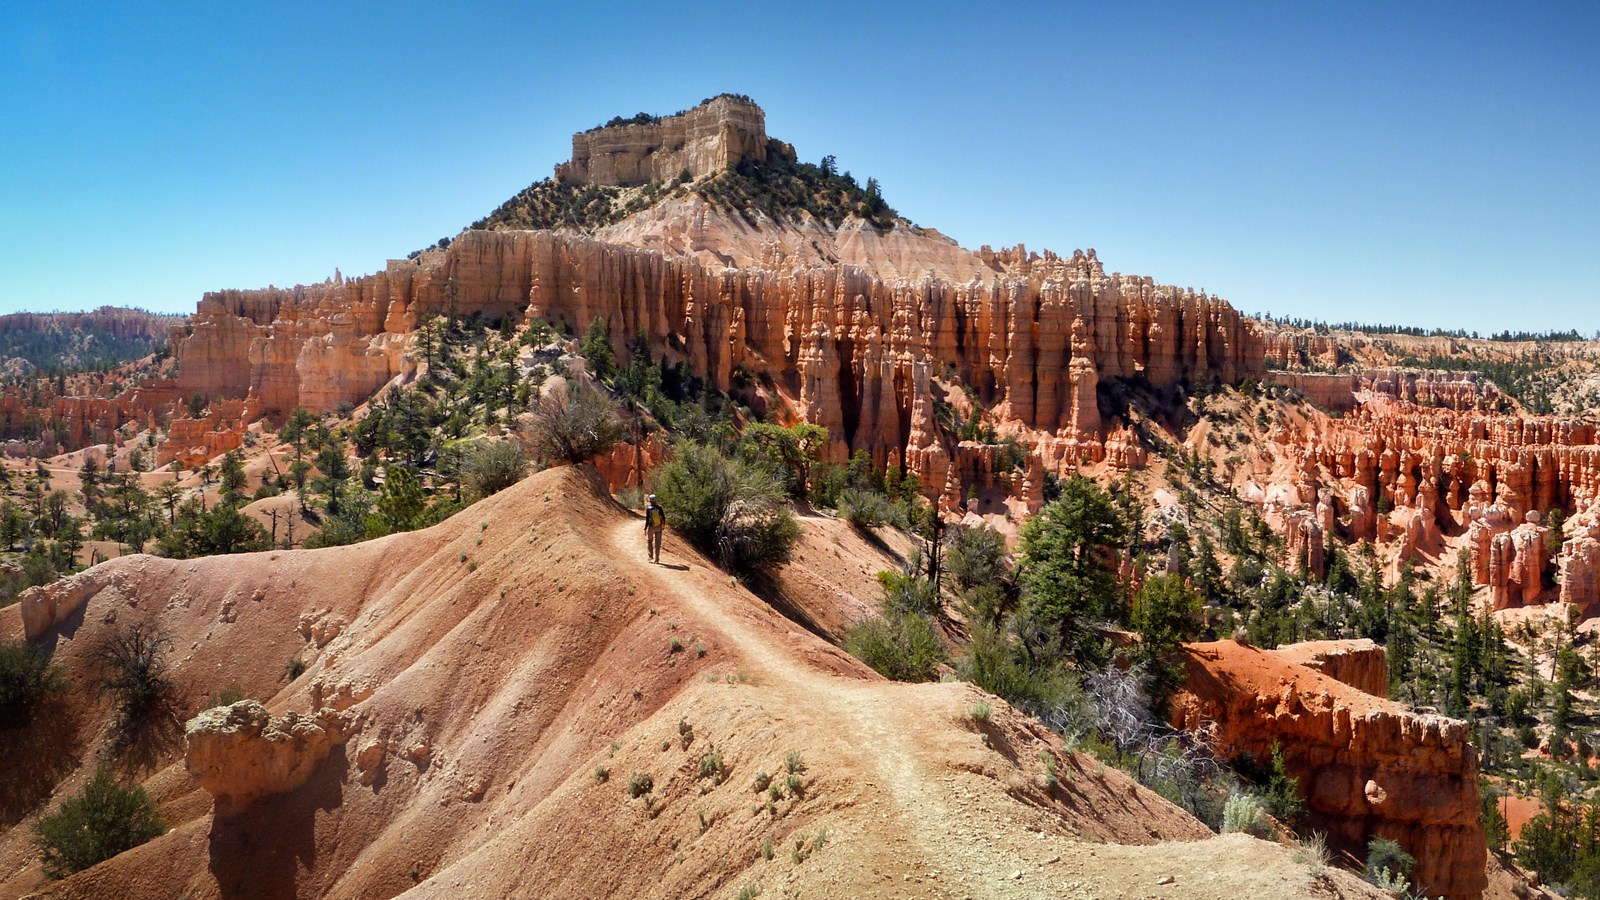 A red rock landscape of rock spires and forest with a beaten path travelling through it